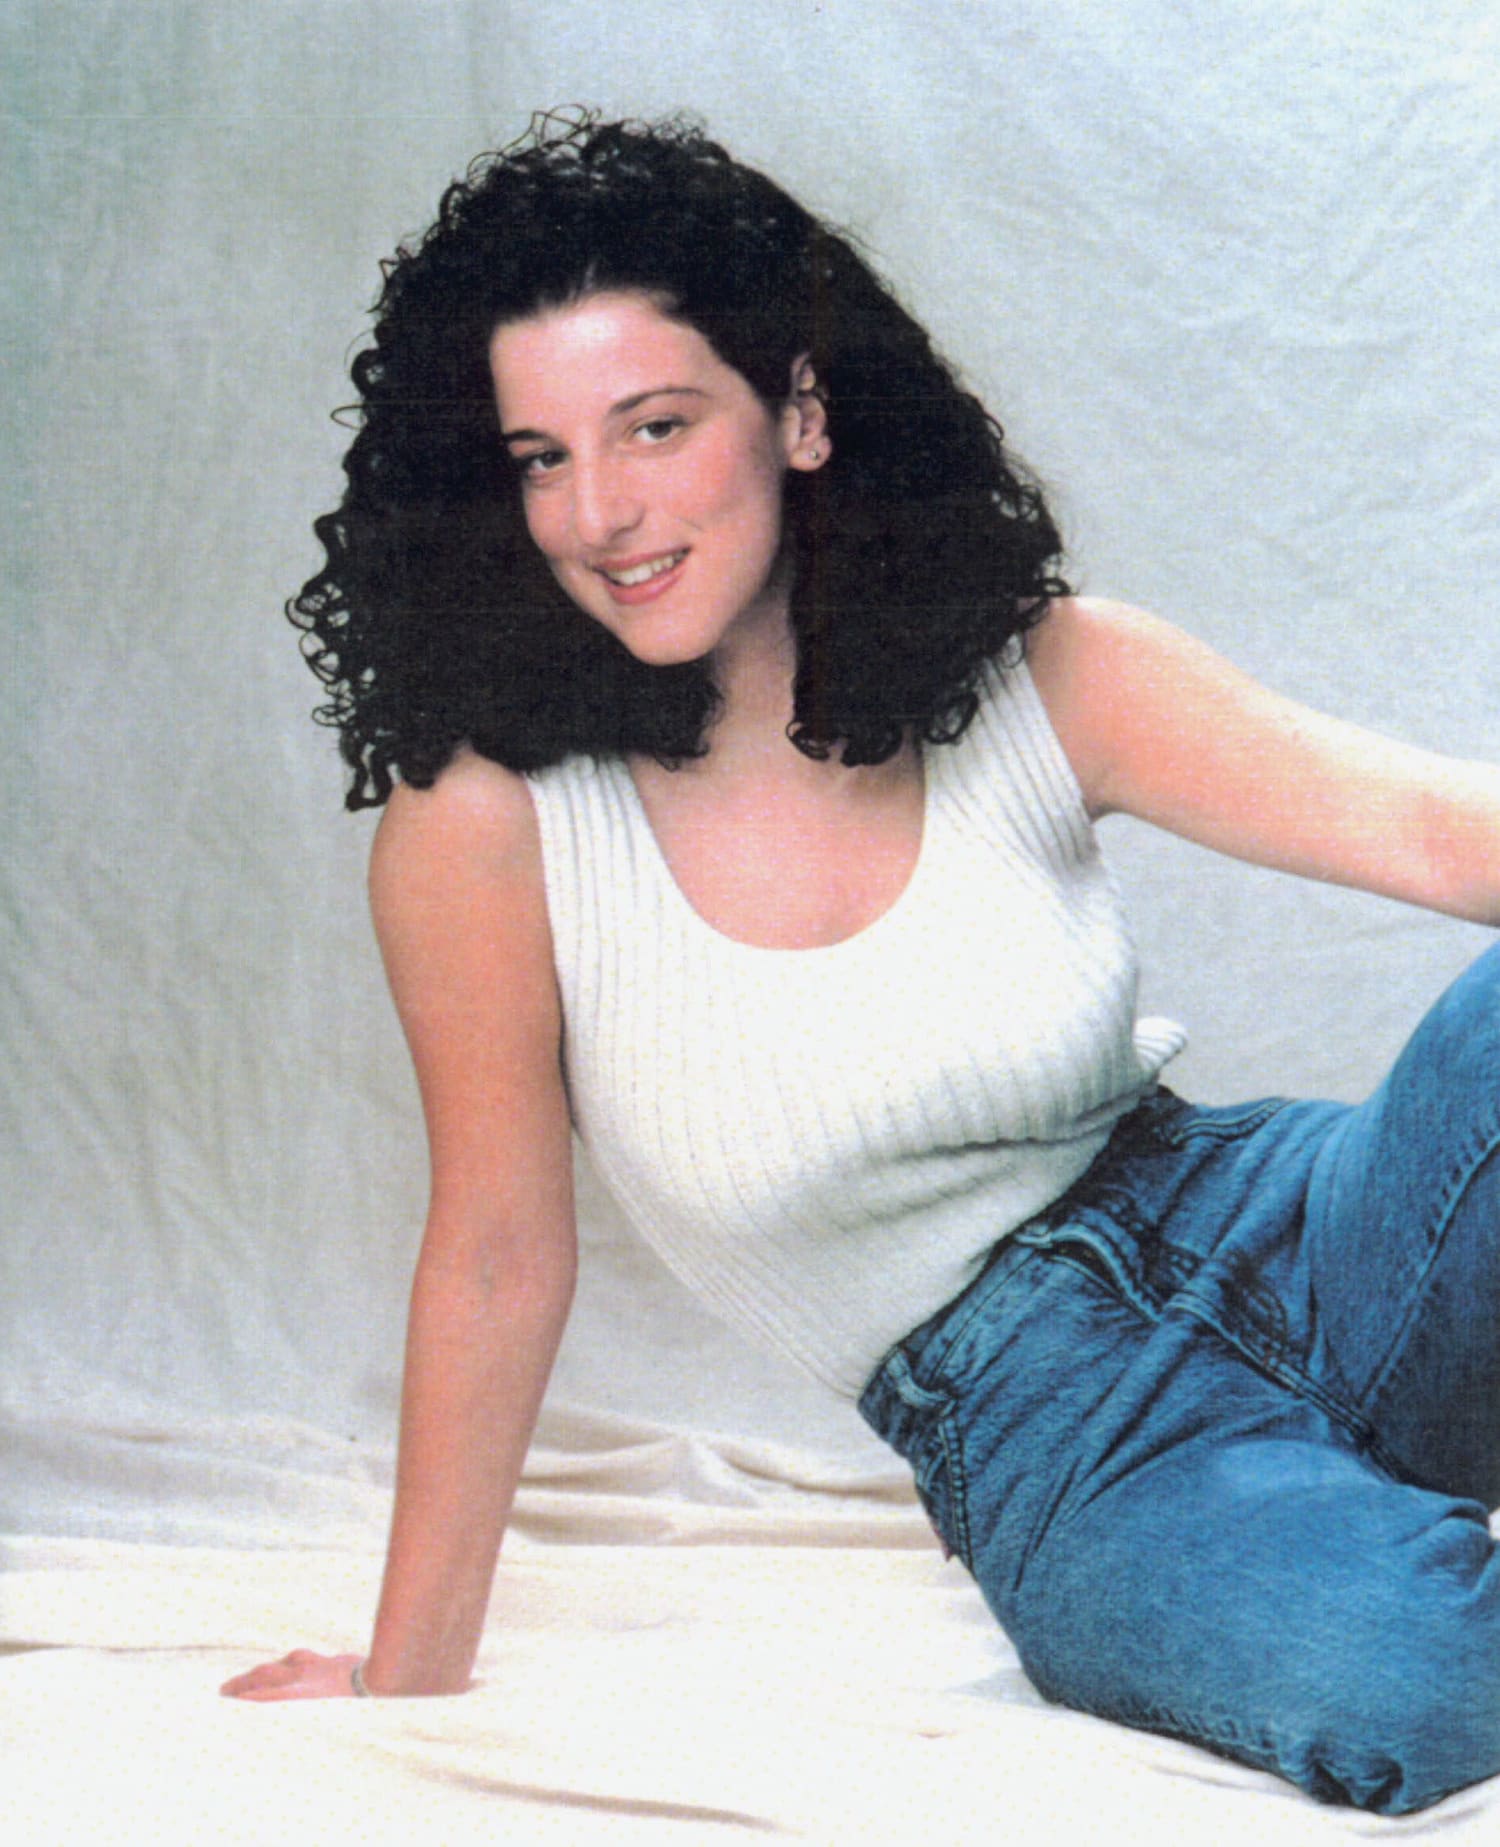 Prosecutors Drop Murder Charge Against Man Accused of Killing Chandra Levy